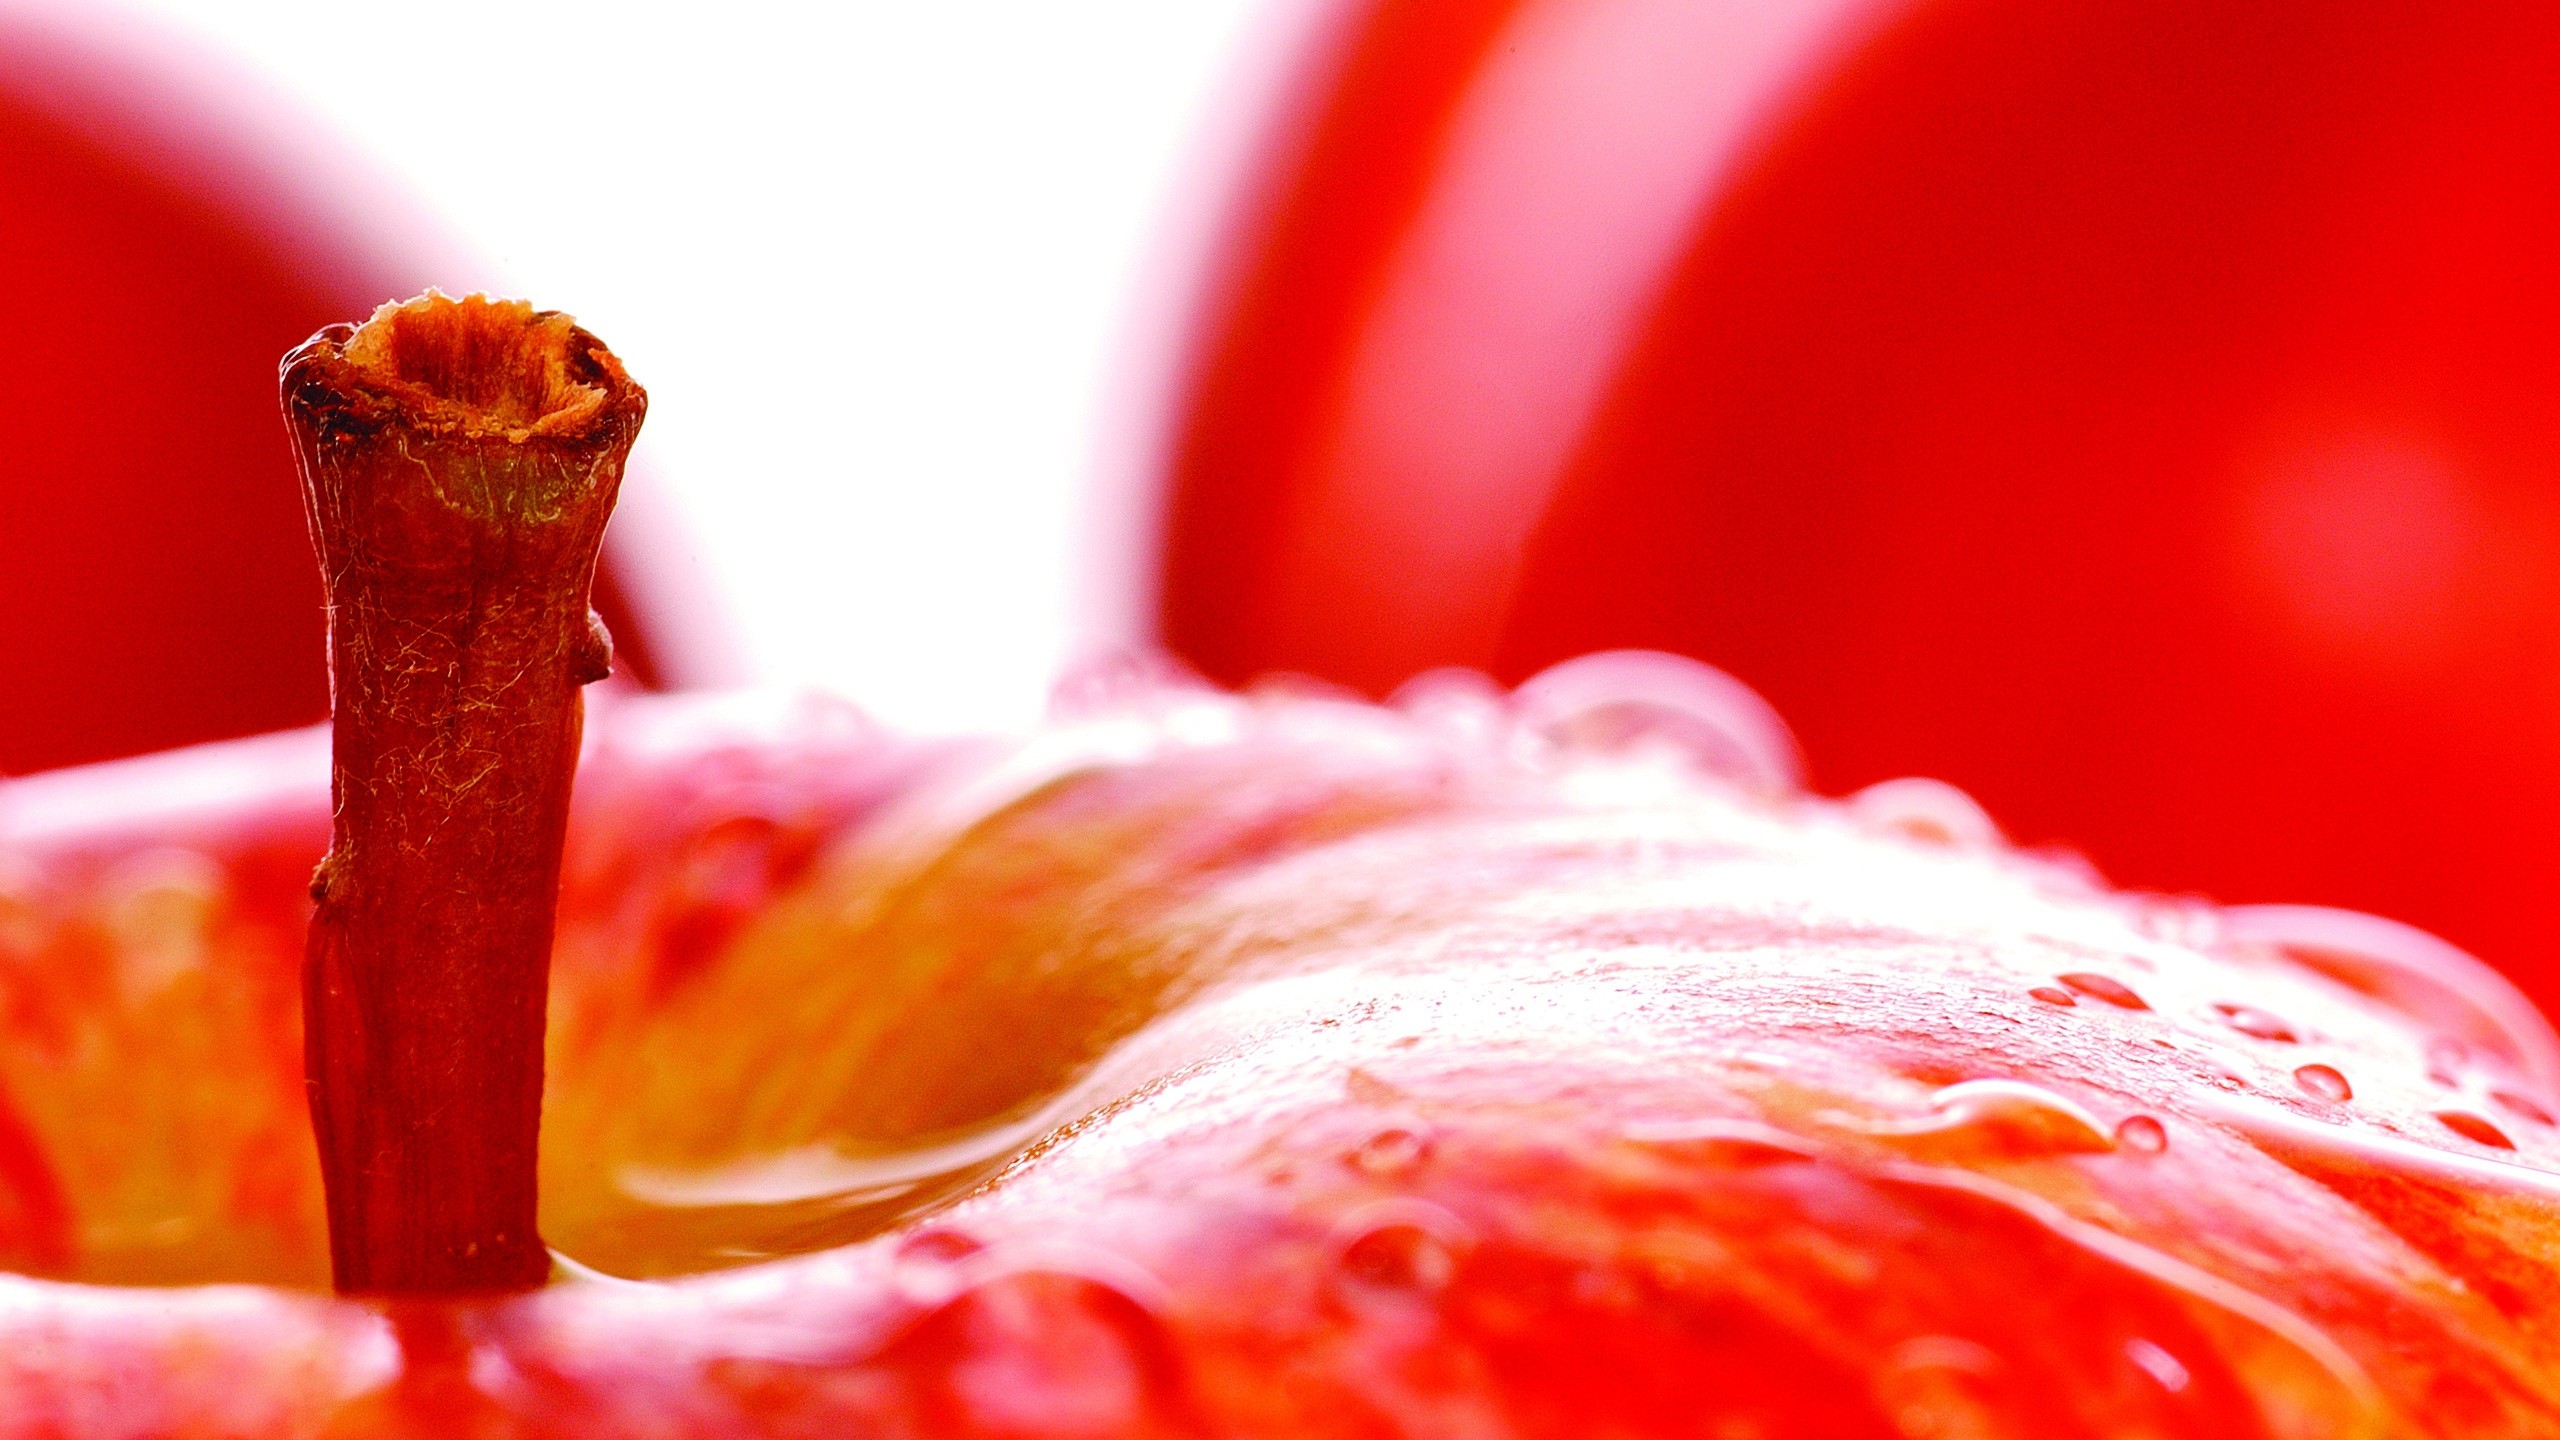 2560x1440 Red Apple Fruit Up Close Wallpaper 3615